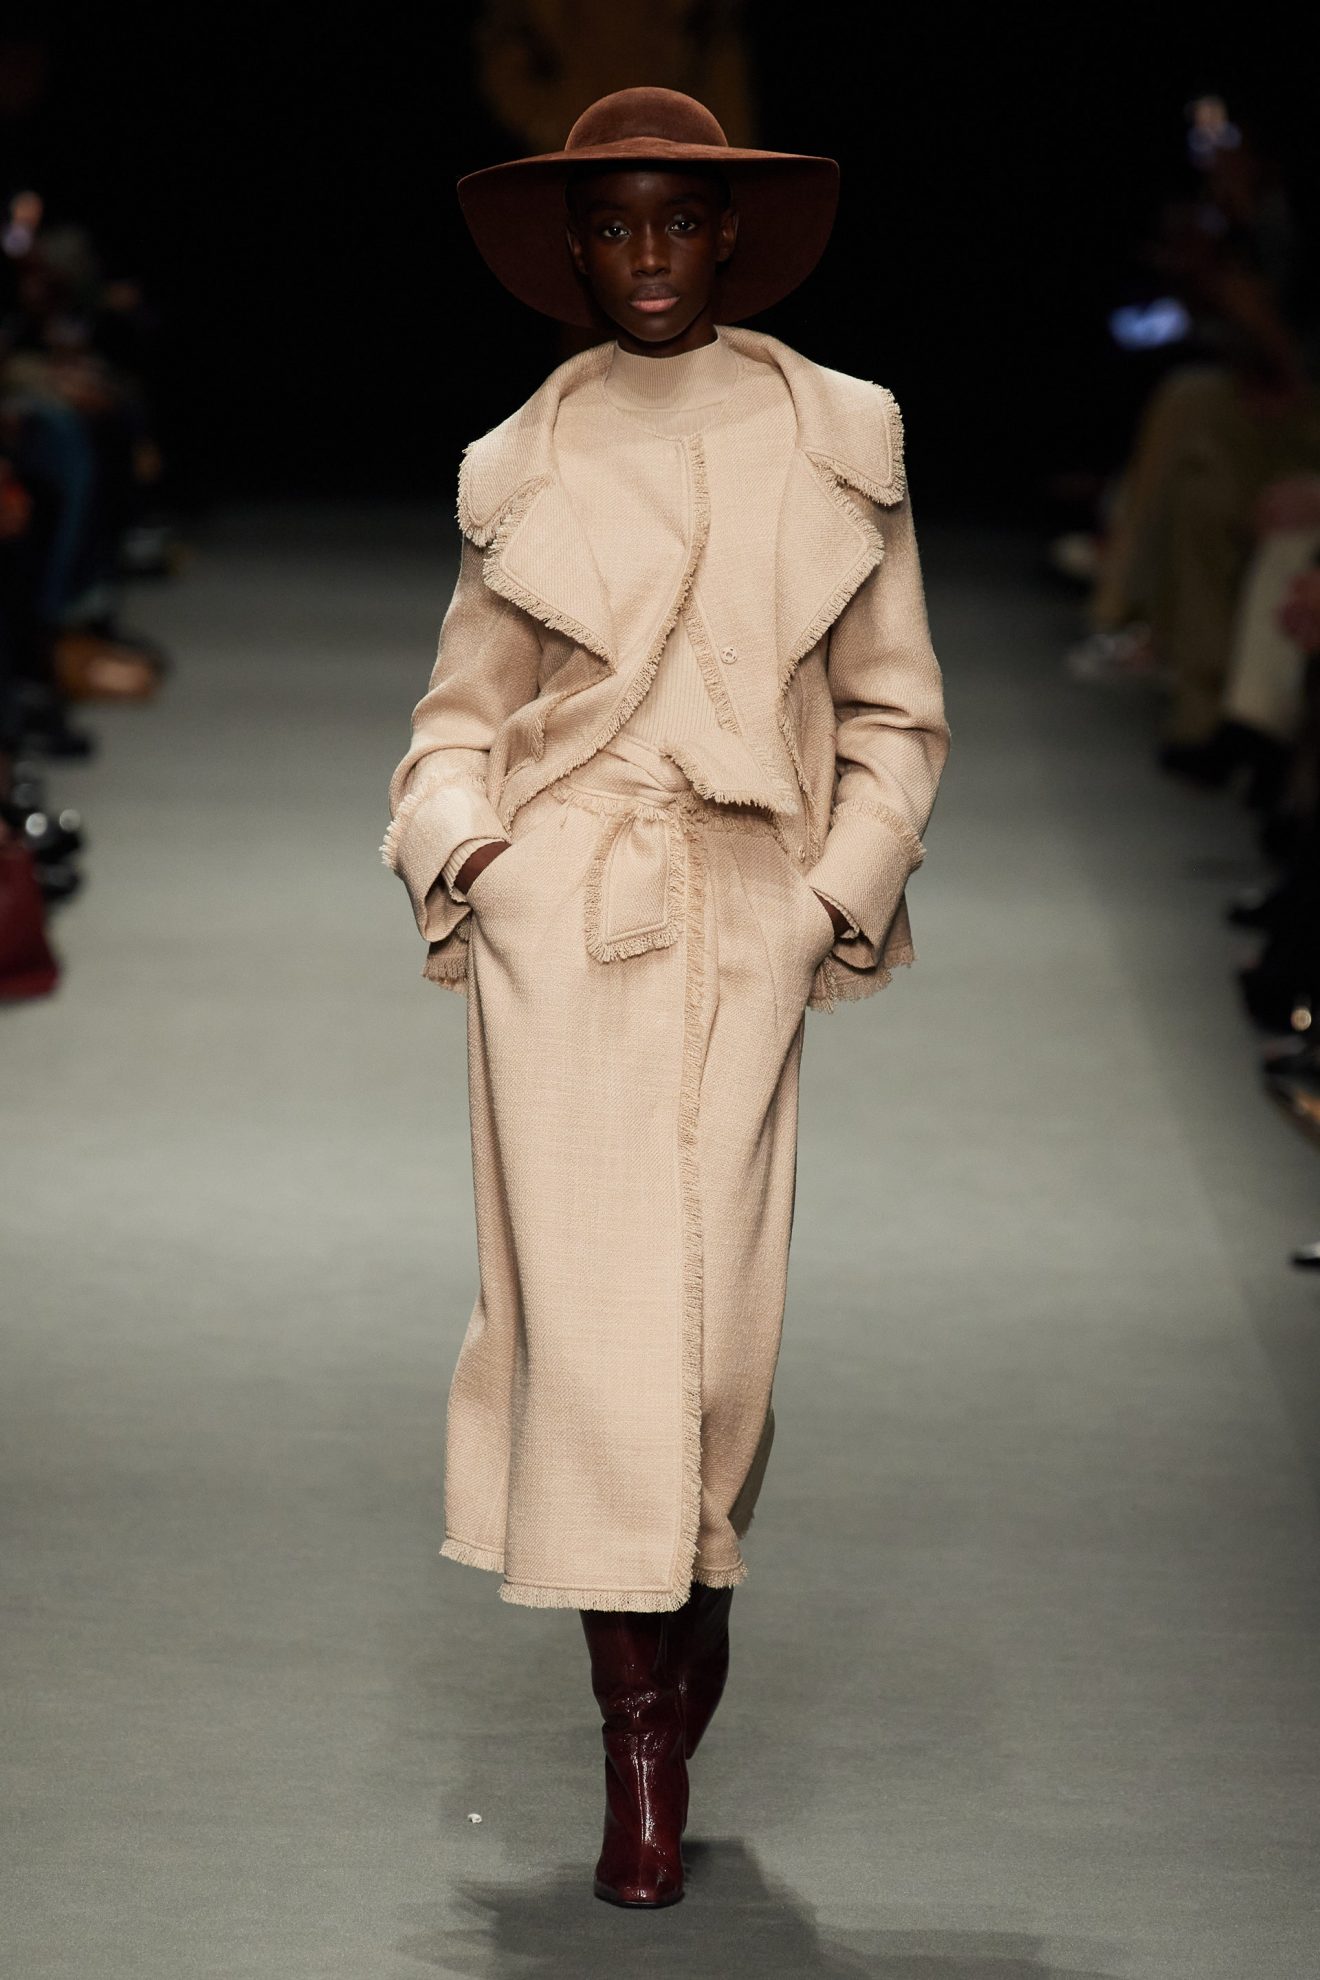 10 Of The Best Looks From Milan Fashion Week Fall/Winter 2022 Show